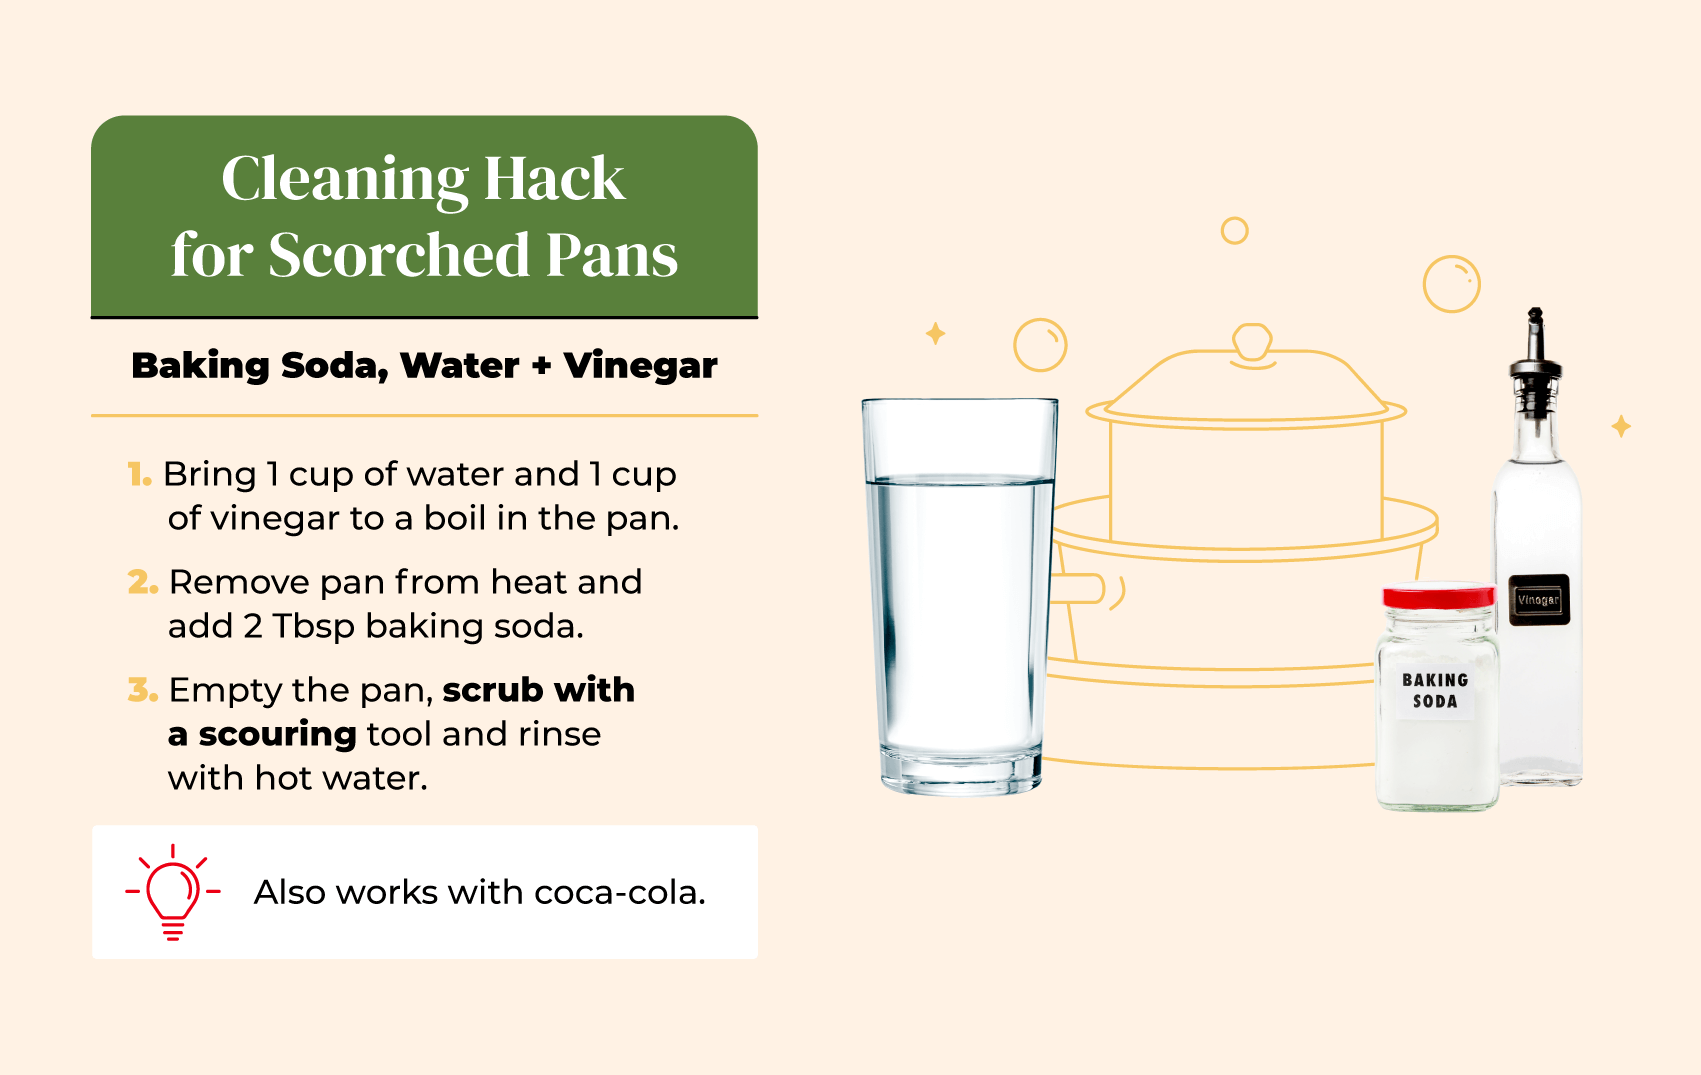 Eco-friendly cleaning hack for scorched pans or pots using vinegar, baking soda, and water.